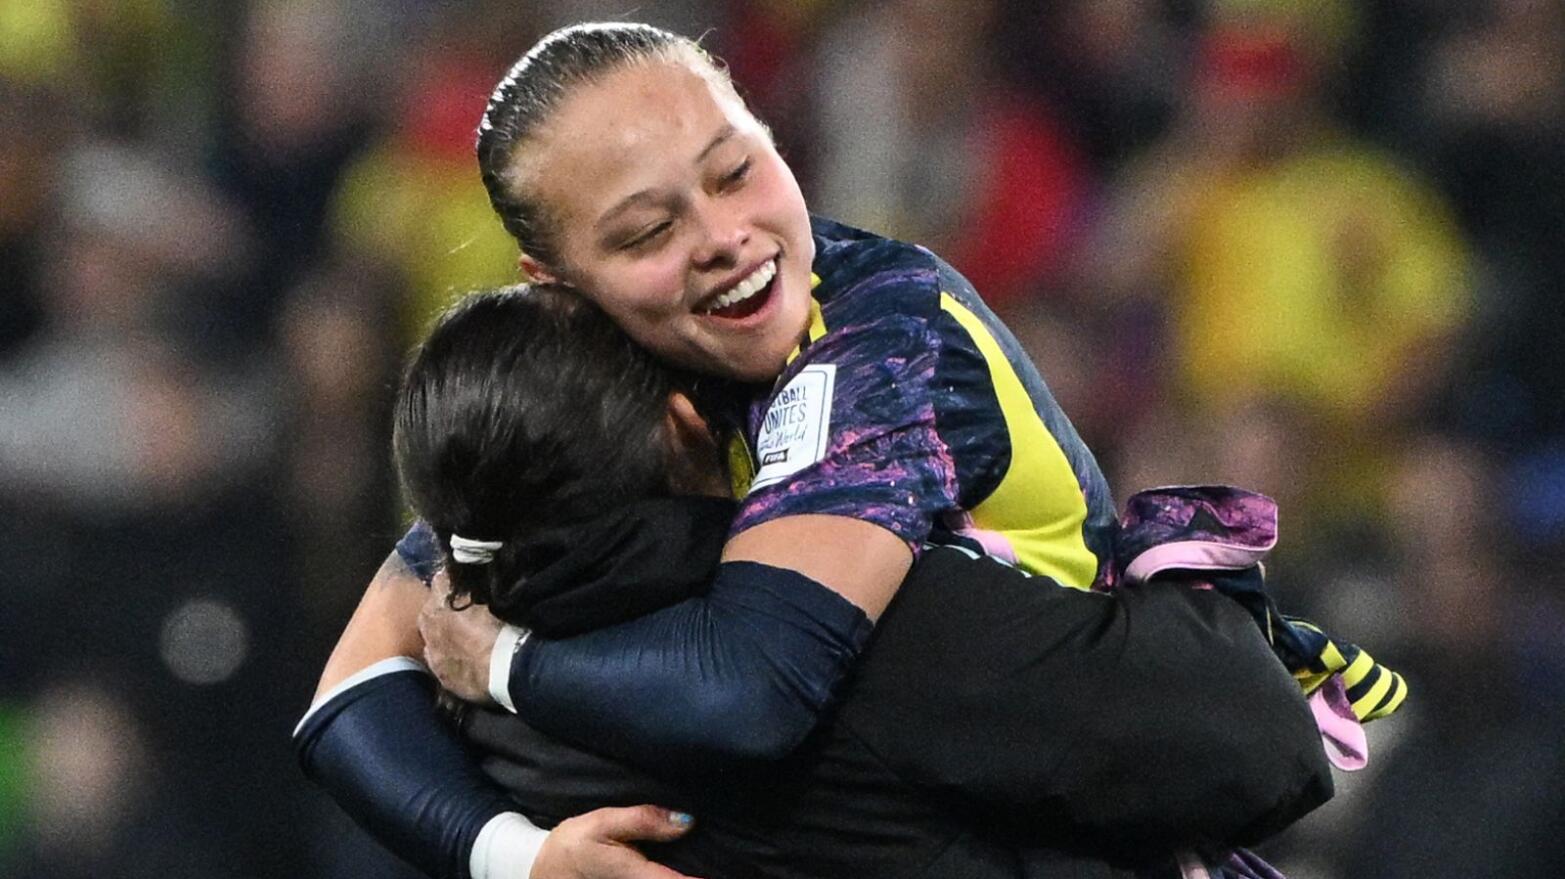 Colombia's players celebrate at the end of their 2023 Women's World Cup round of 16 football match against Jamaica at Melbourne Rectangular Stadium on Tuesday